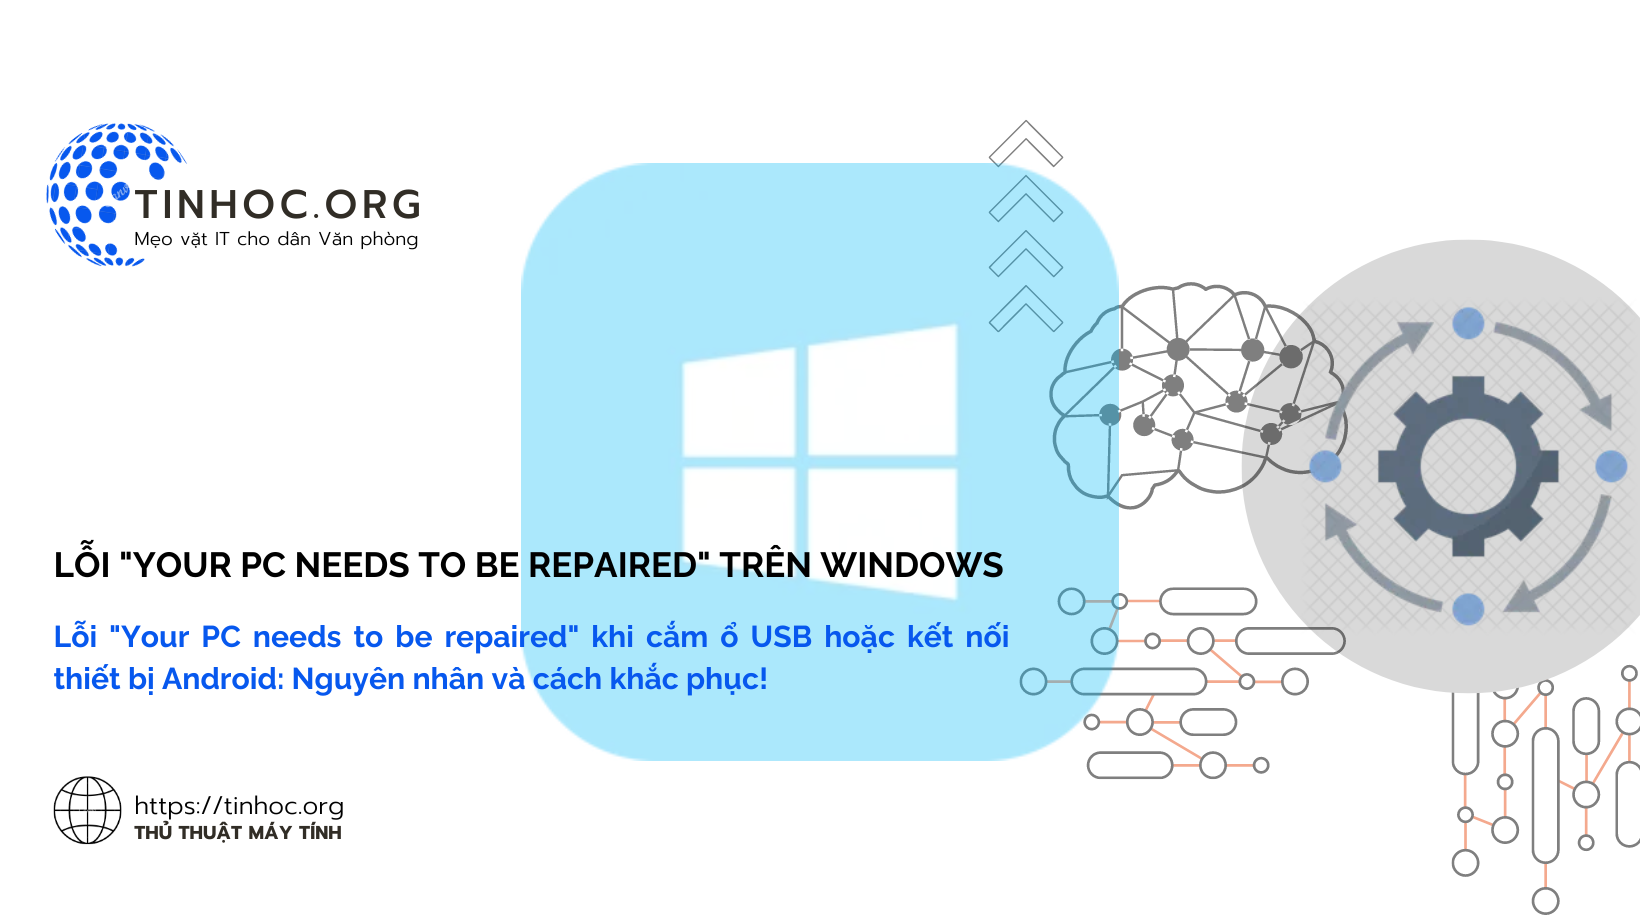 Lỗi "Your PC needs to be repaired" trên Windows